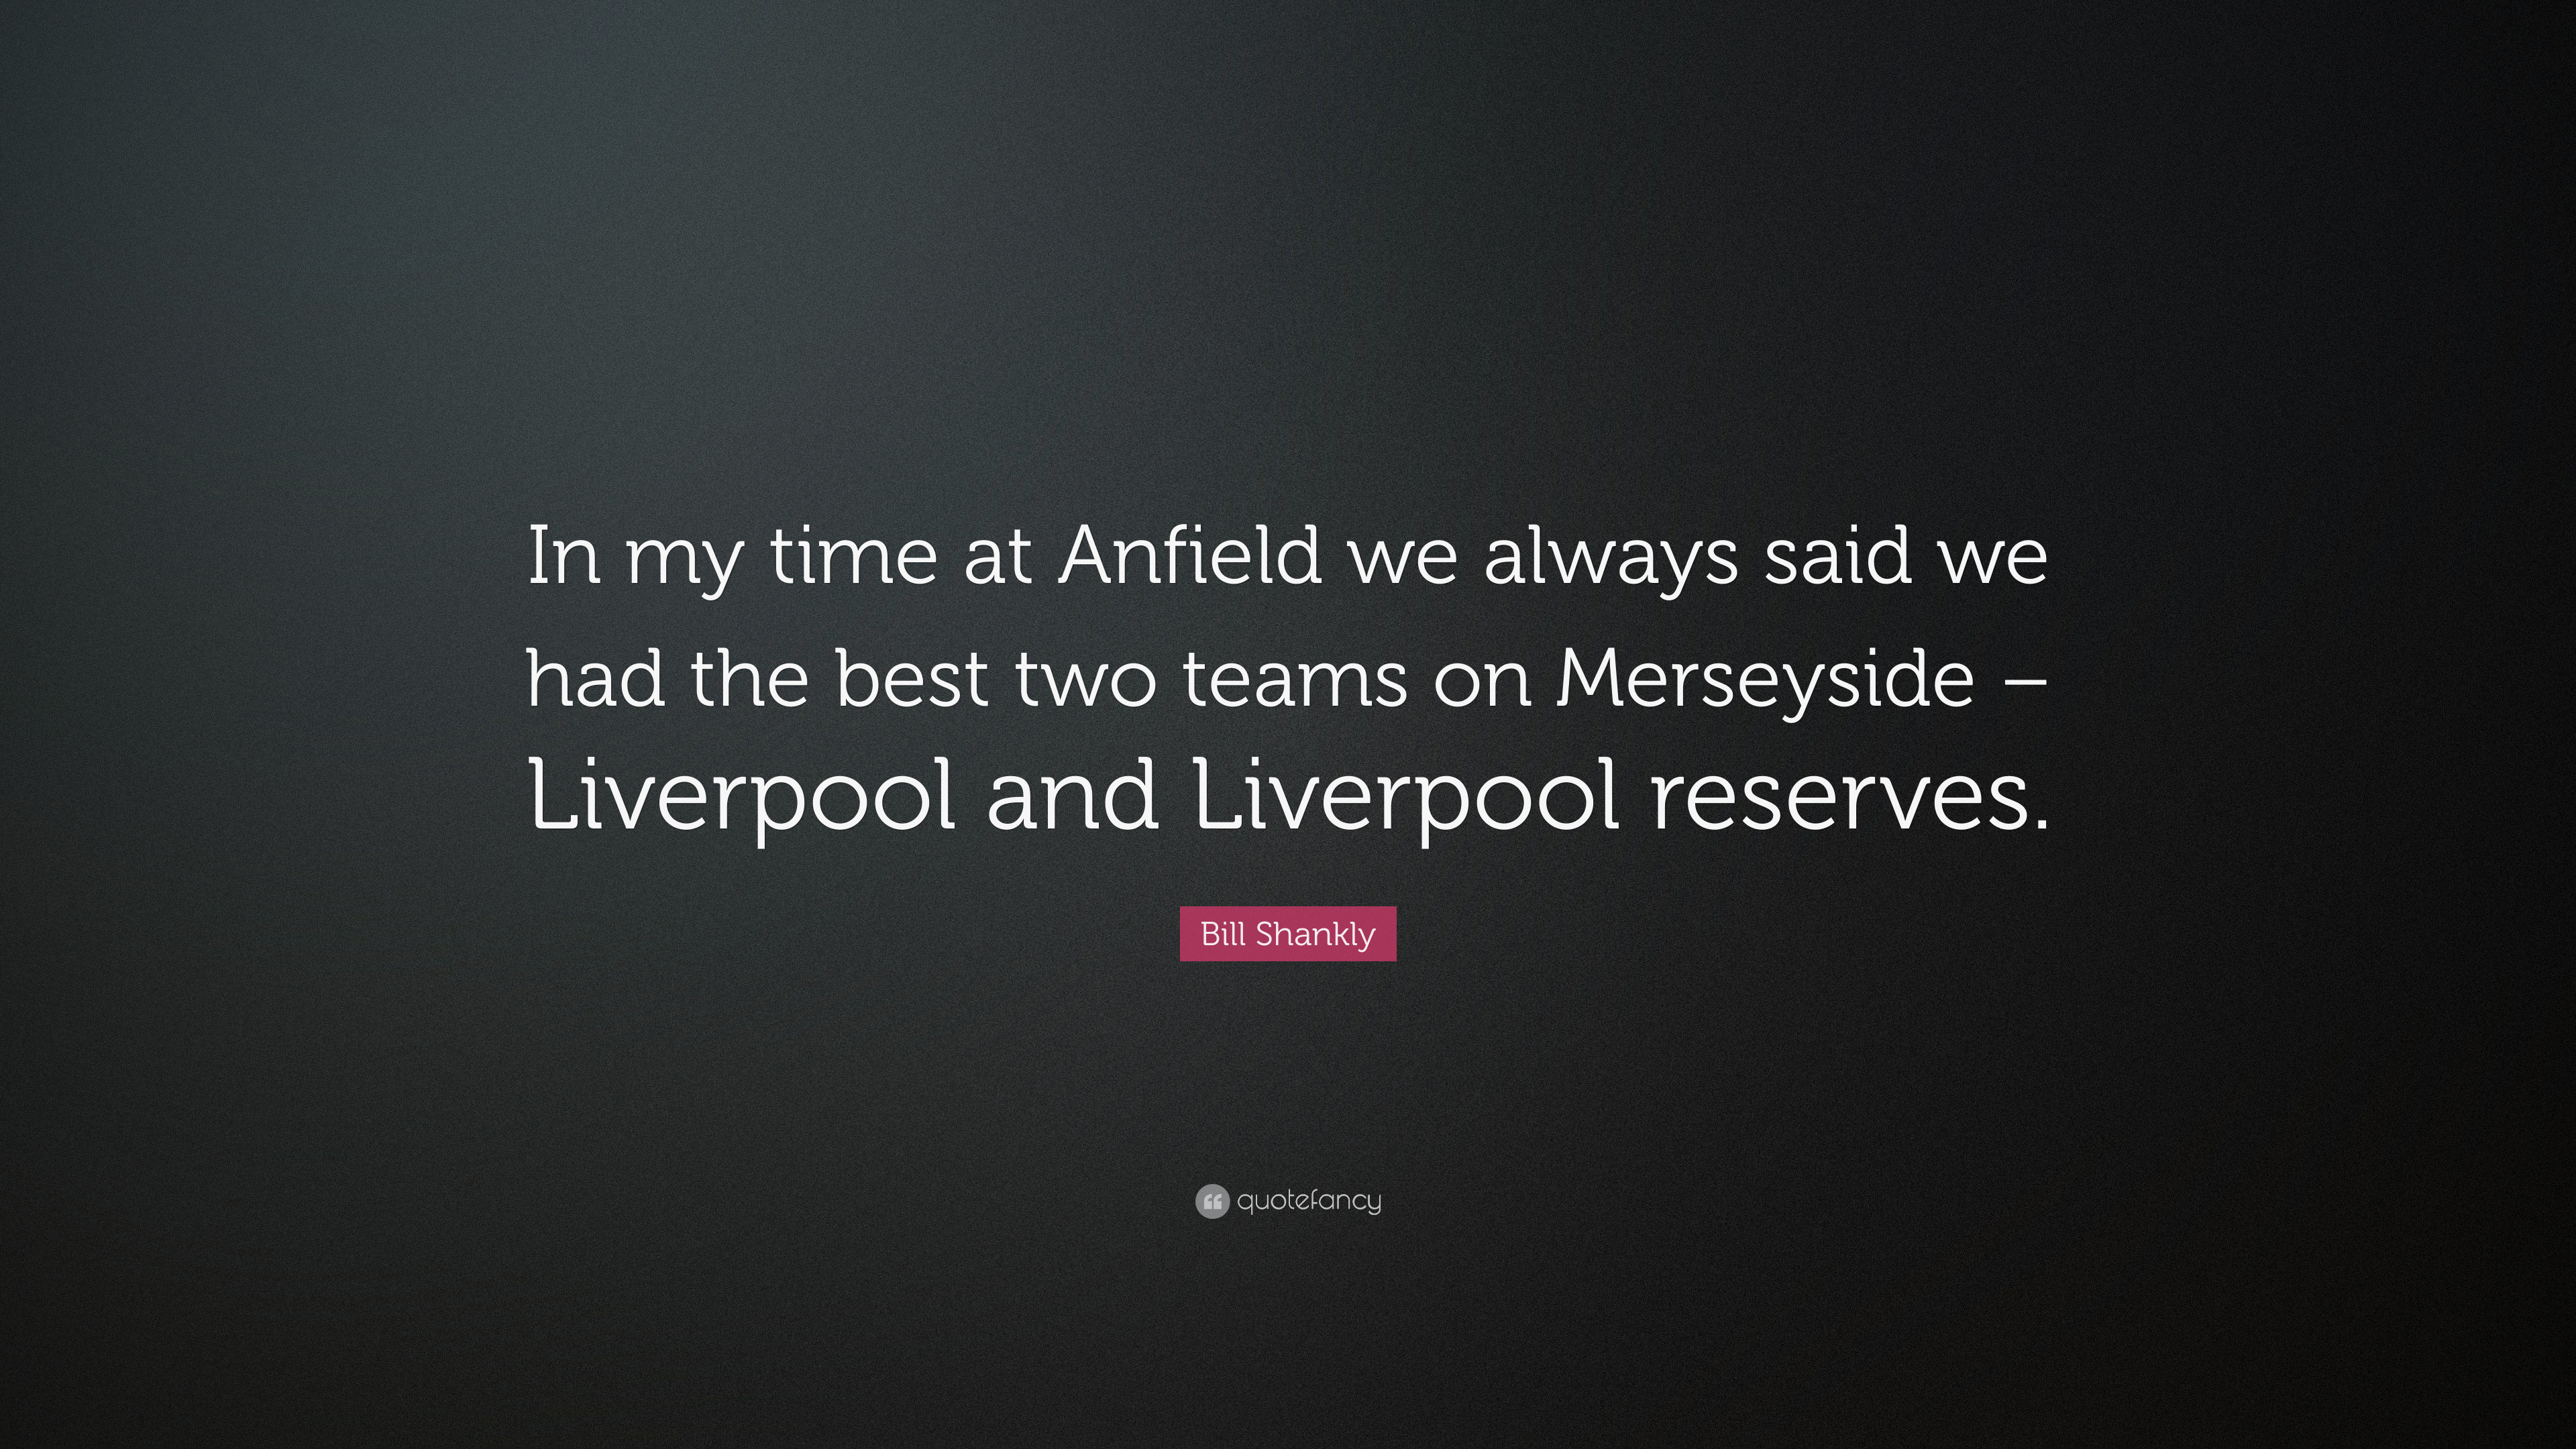 3840x2160 Bill Shankly Quote: “In my time at Anfield we always said we had the